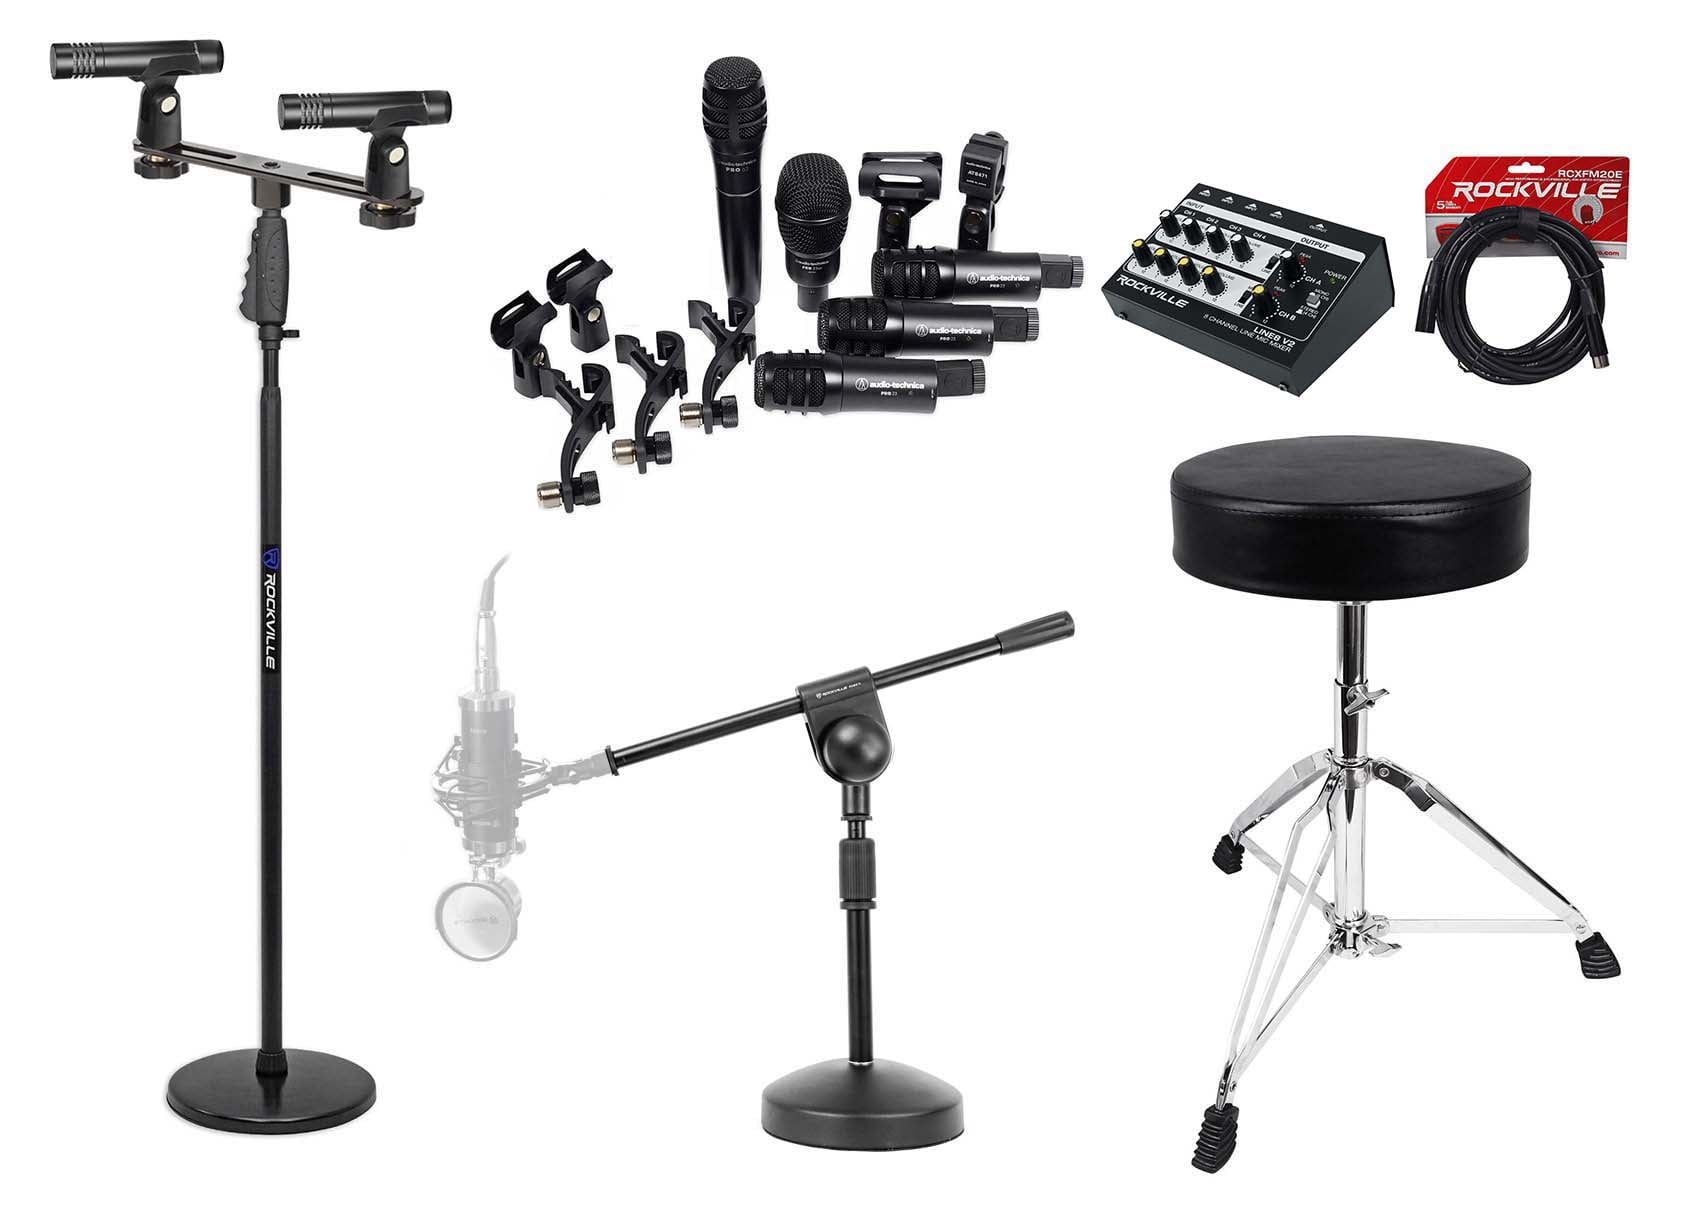 Audio Technica Pro Drum Microphone Kit 7 Mics+3 Stands+8-Channel Mixer+Cables 